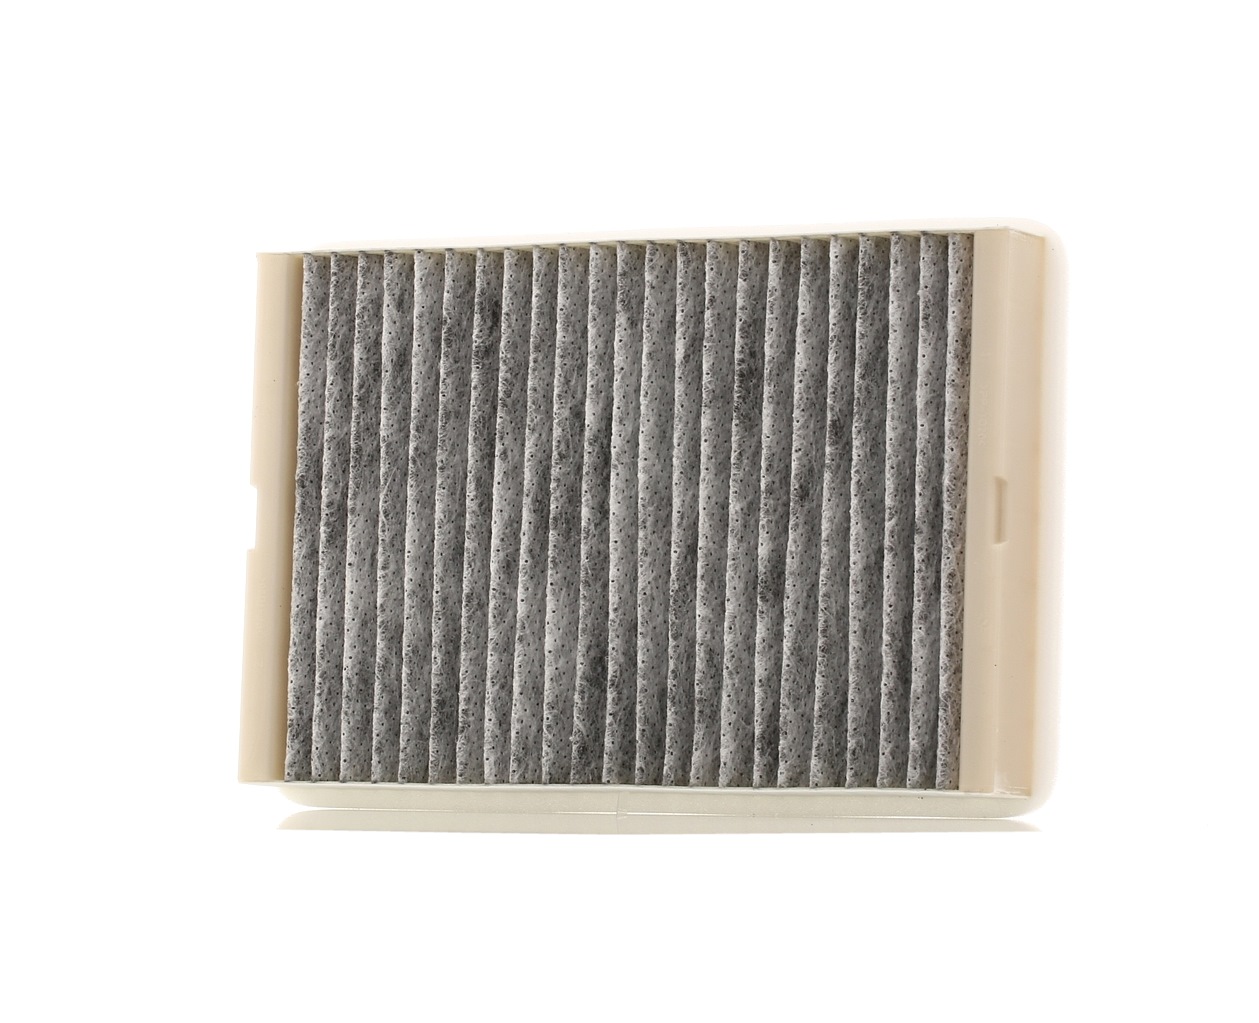 76888093 MAHLE ORIGINAL Activated Carbon Filter, 266,0 mm x 173 mm x 34,0 mm Width: 173mm, Height: 34,0mm, Length: 266,0mm Cabin filter LAK 79 buy